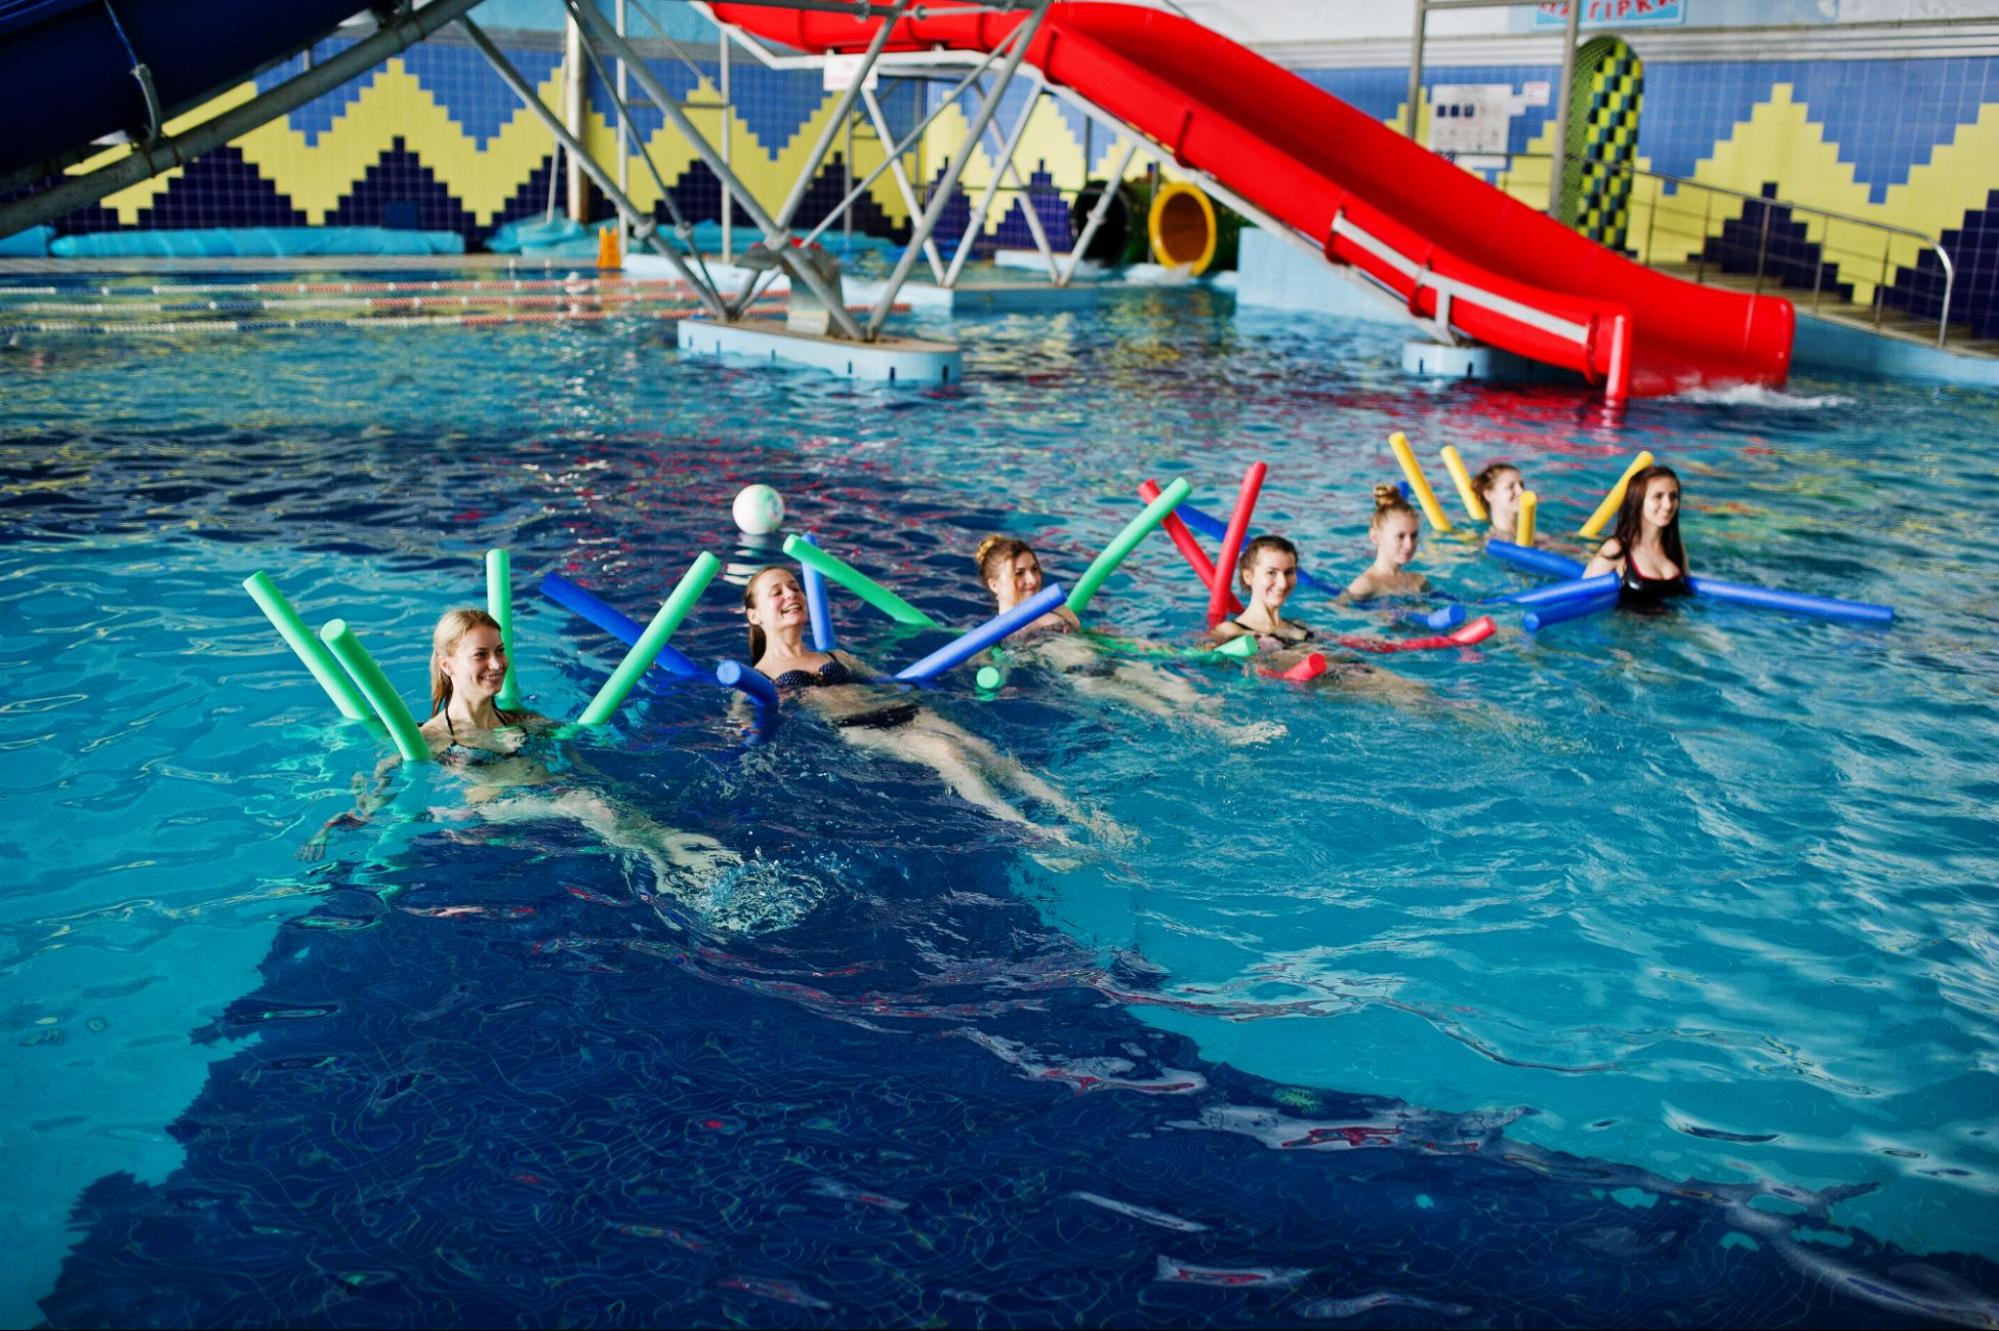 A fitness group is doing aerobic exercises in a swimming pool.